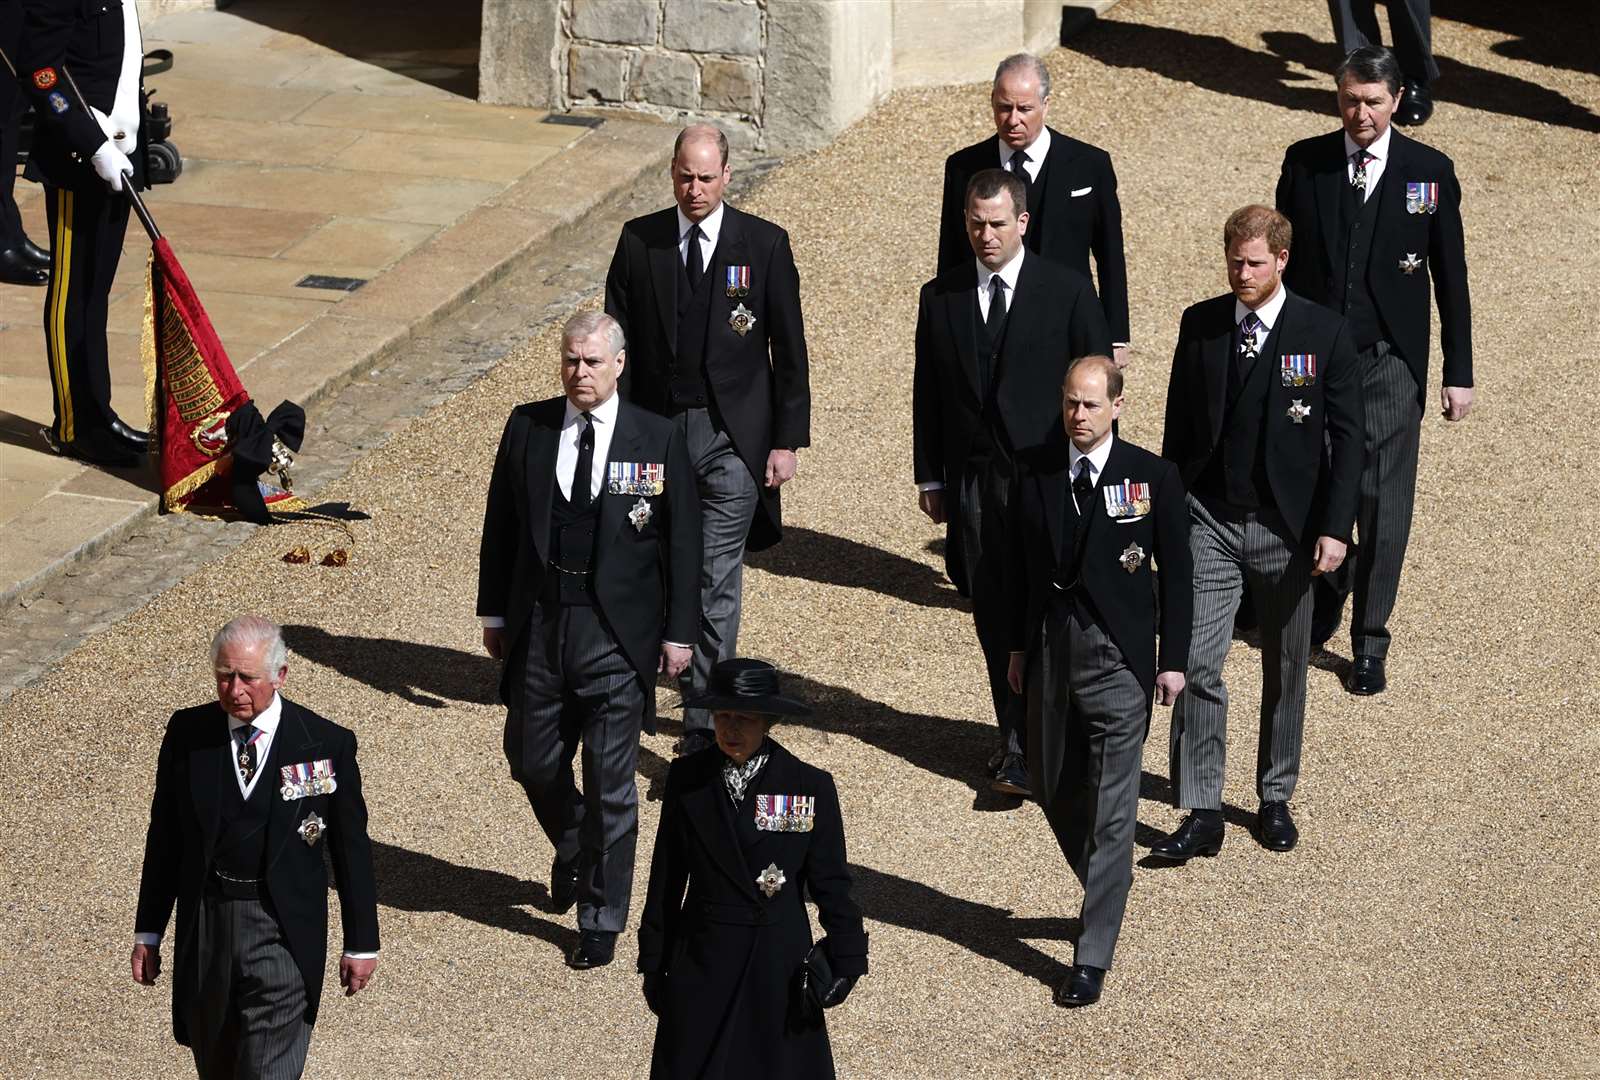 The processing royal family in morning suits or dress (Adrian Dennis/PA)